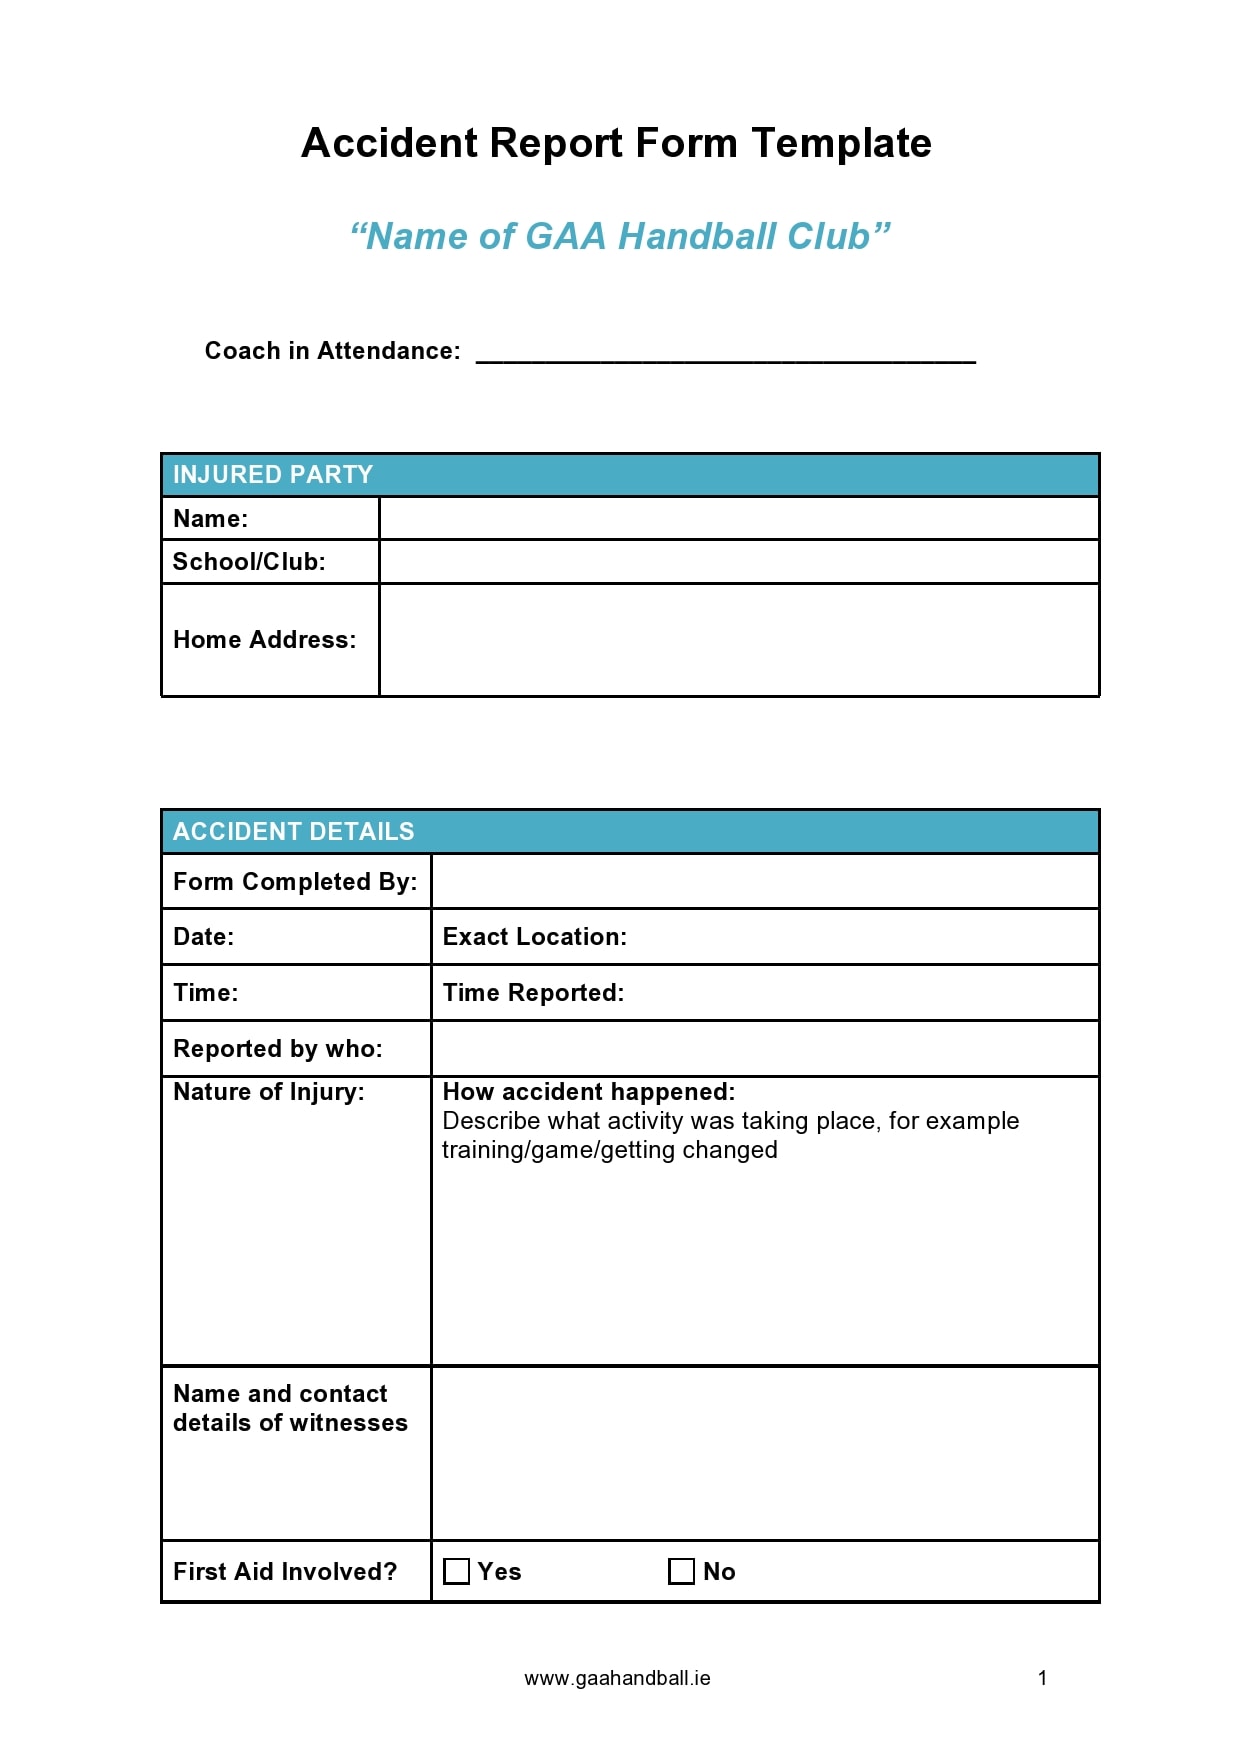 23 Accident Report Forms (Car, Work Injury, more) - TemplateArchive Throughout Motor Vehicle Accident Report Form Template